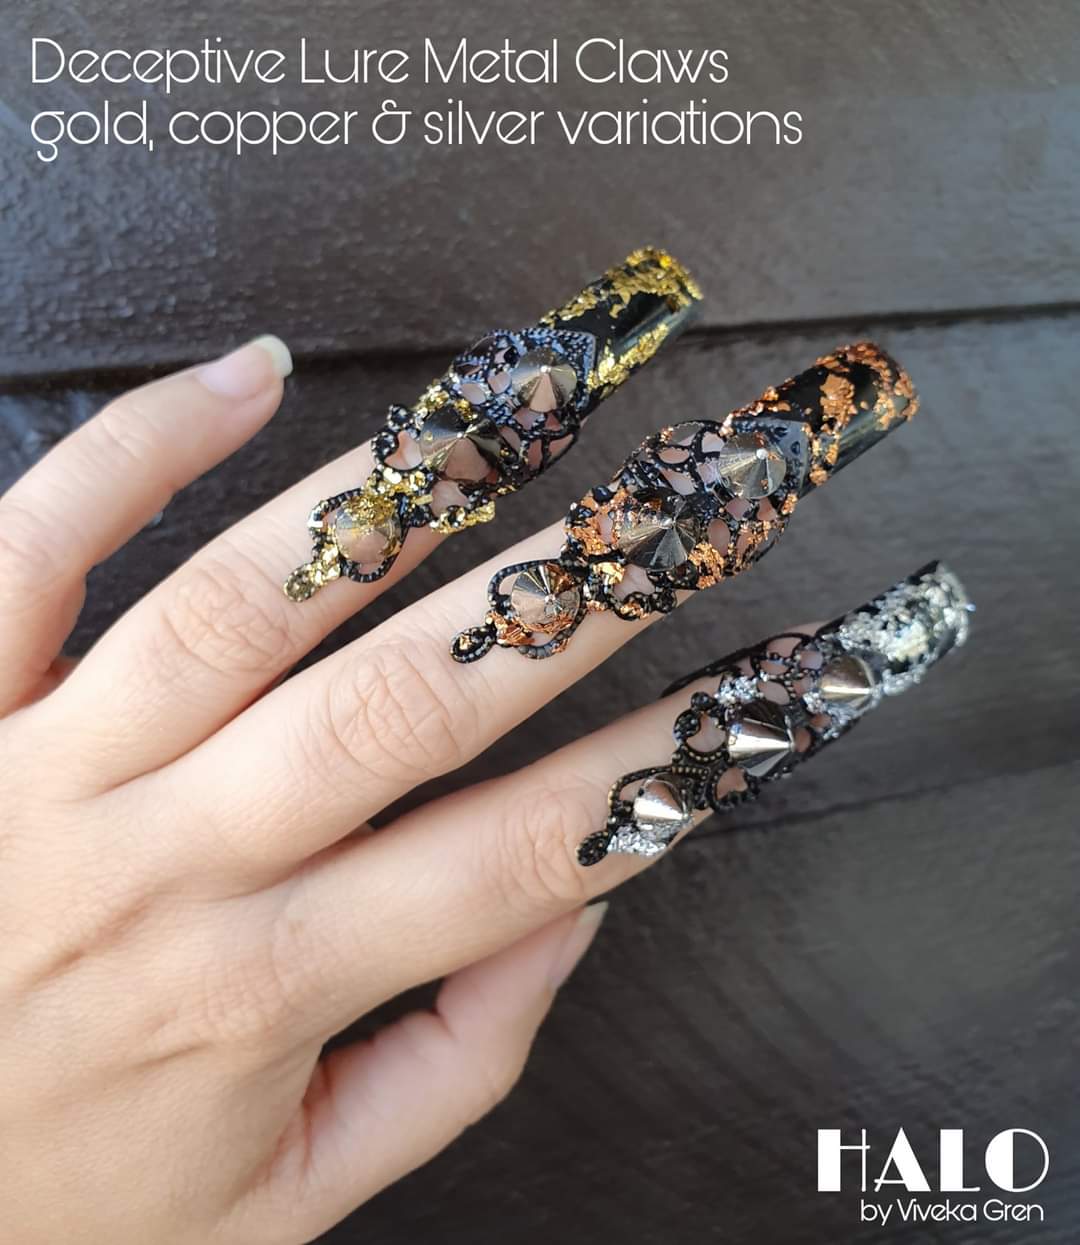 Made-to-order: the Deceptive Lure ornate nails